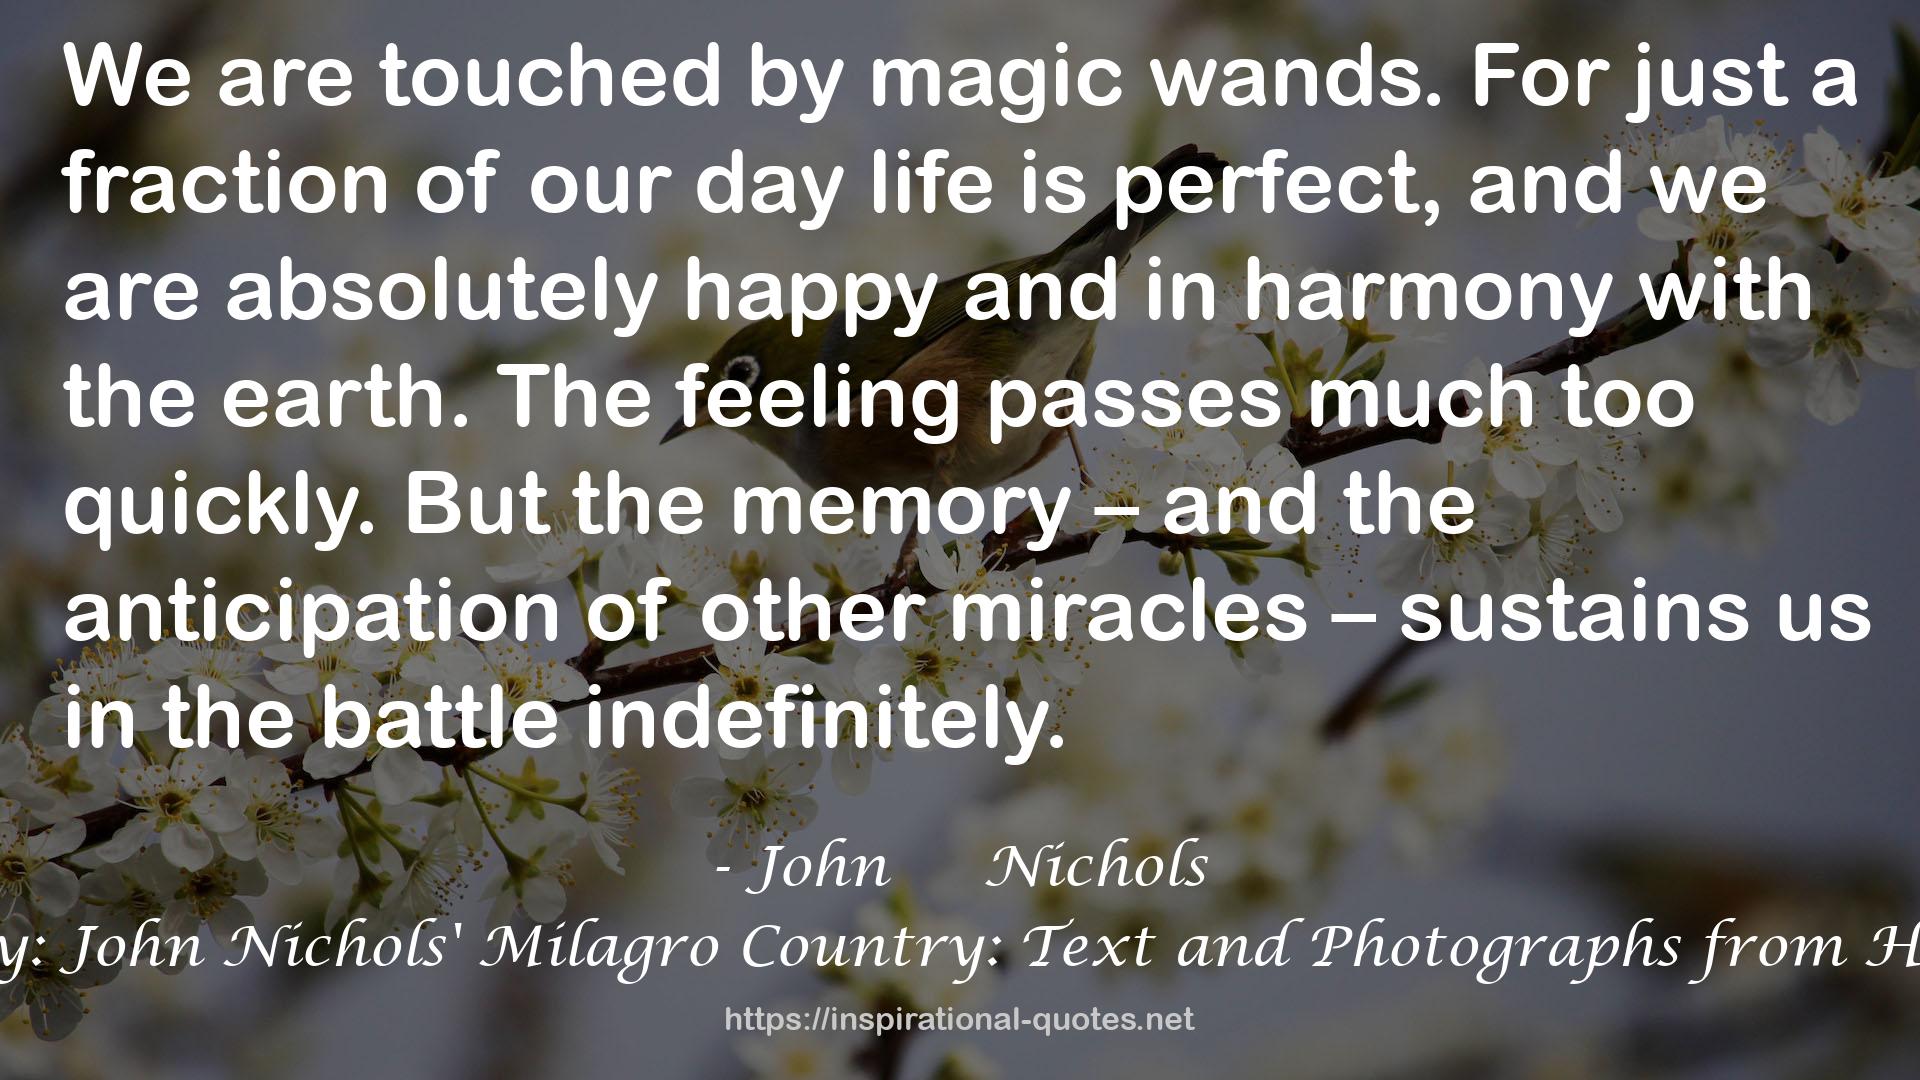 A Fragile Beauty: John Nichols' Milagro Country: Text and Photographs from His Life and Work QUOTES